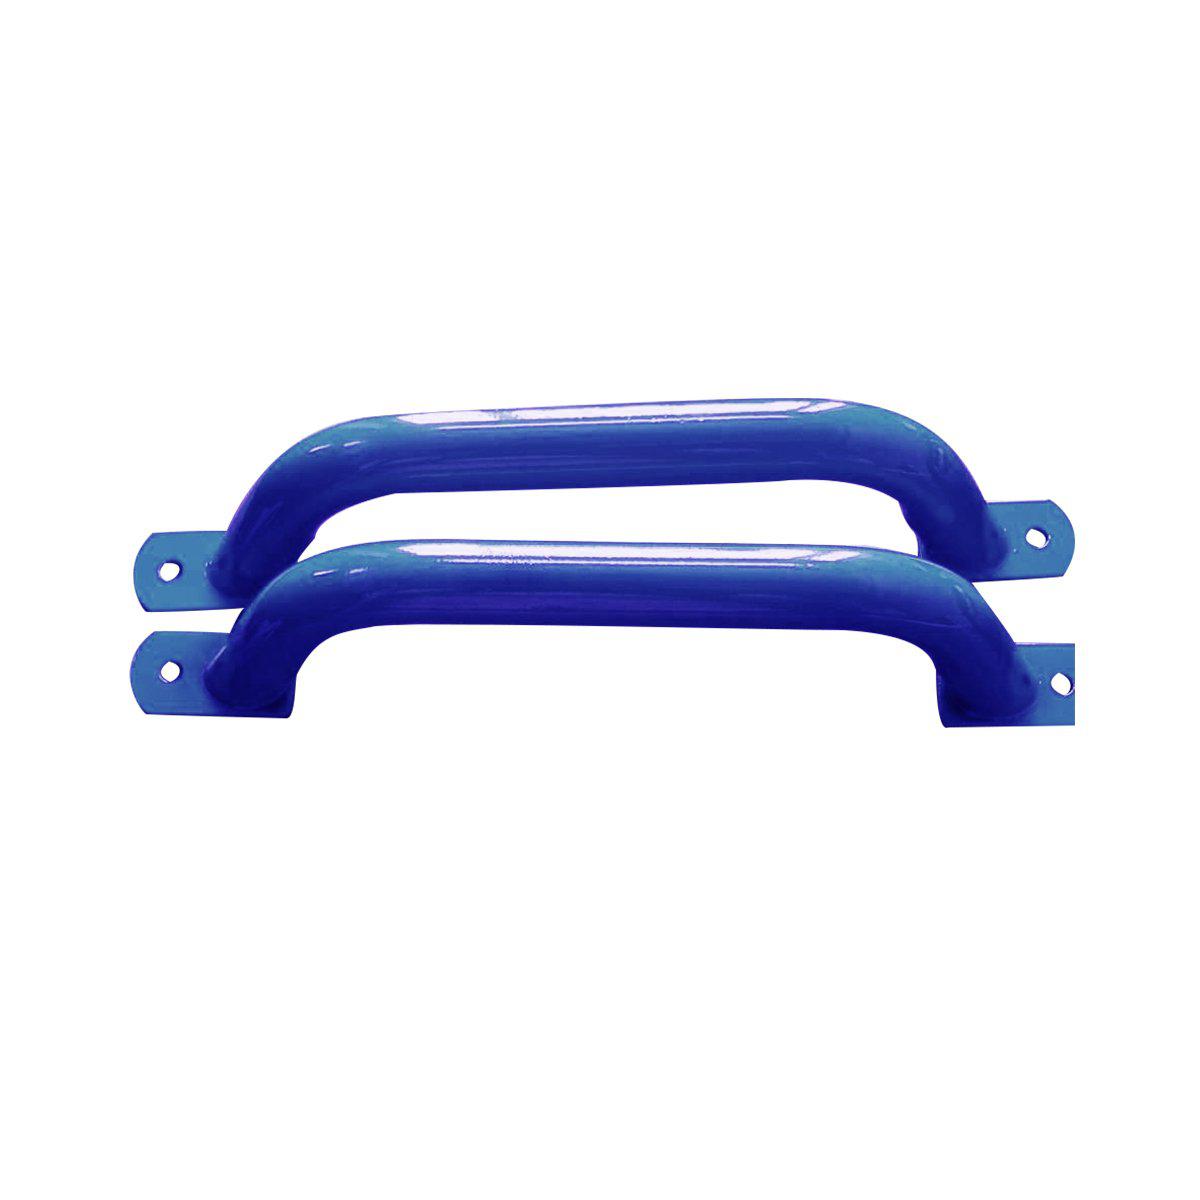 Metal Handle Pair (330mm) Blue, Green, Red or Yellow